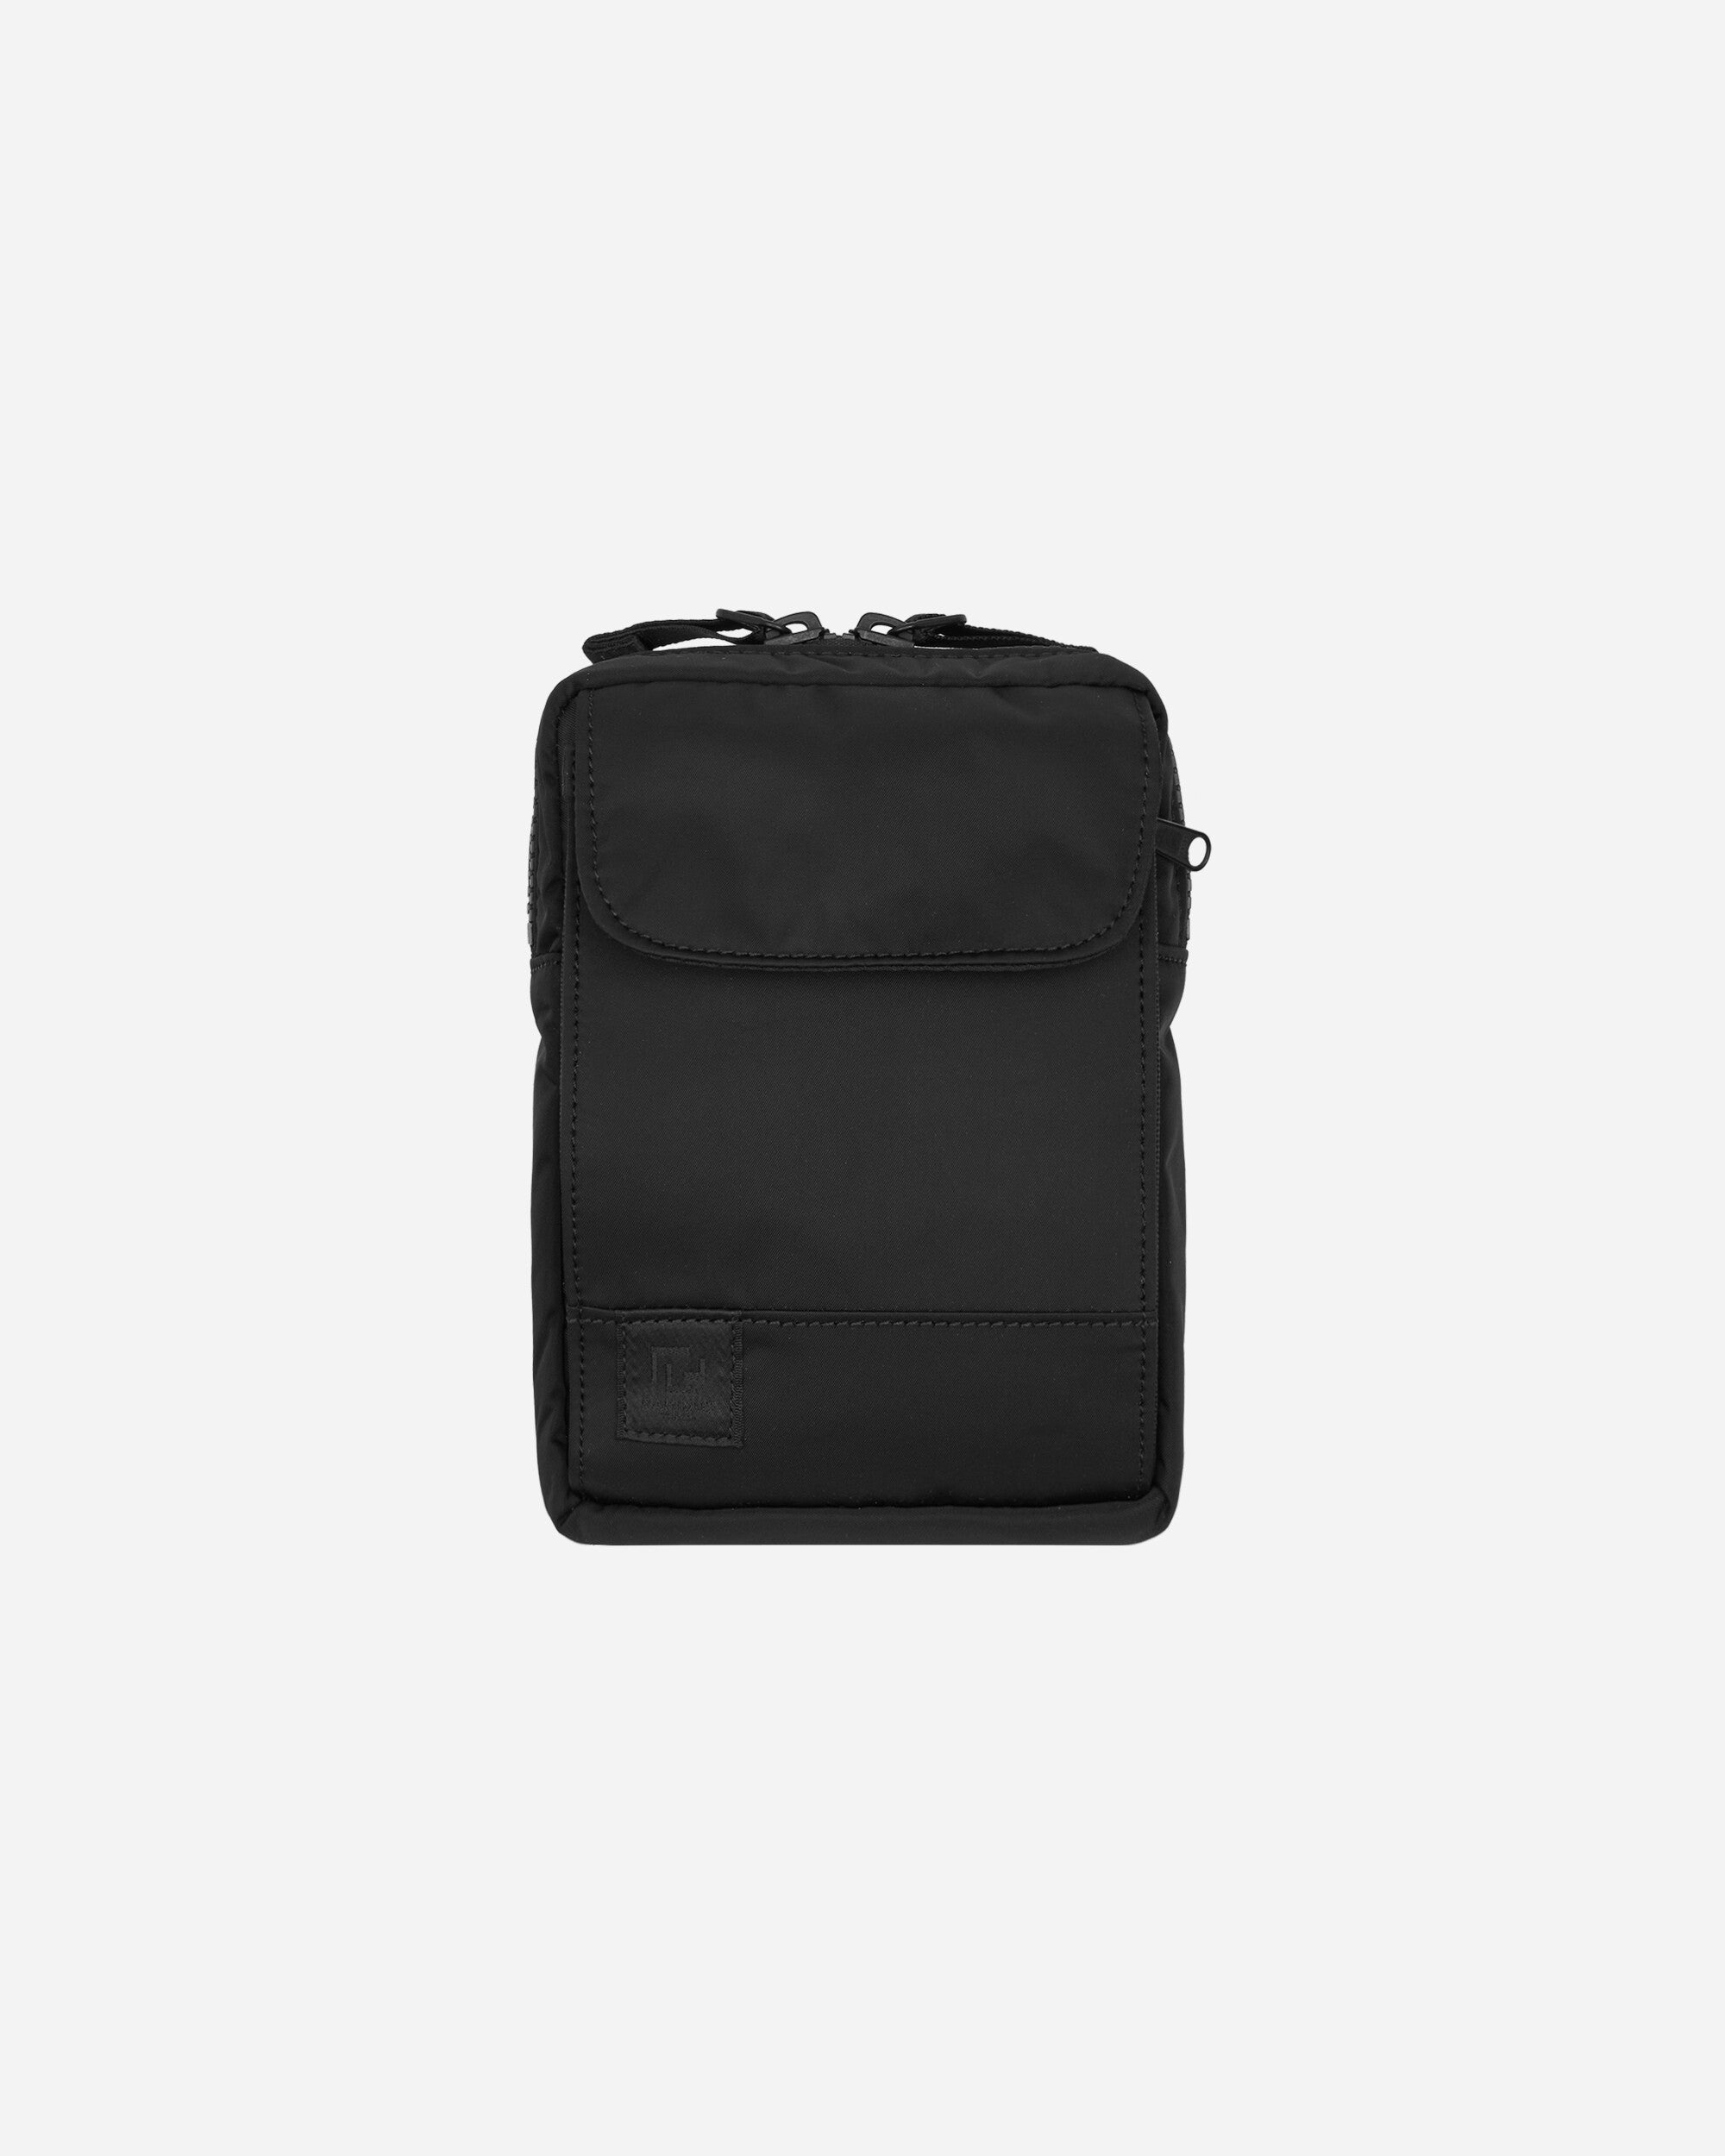 Ramidus Wallet Pouch Black Bags and Backpacks Pouches B011086 1